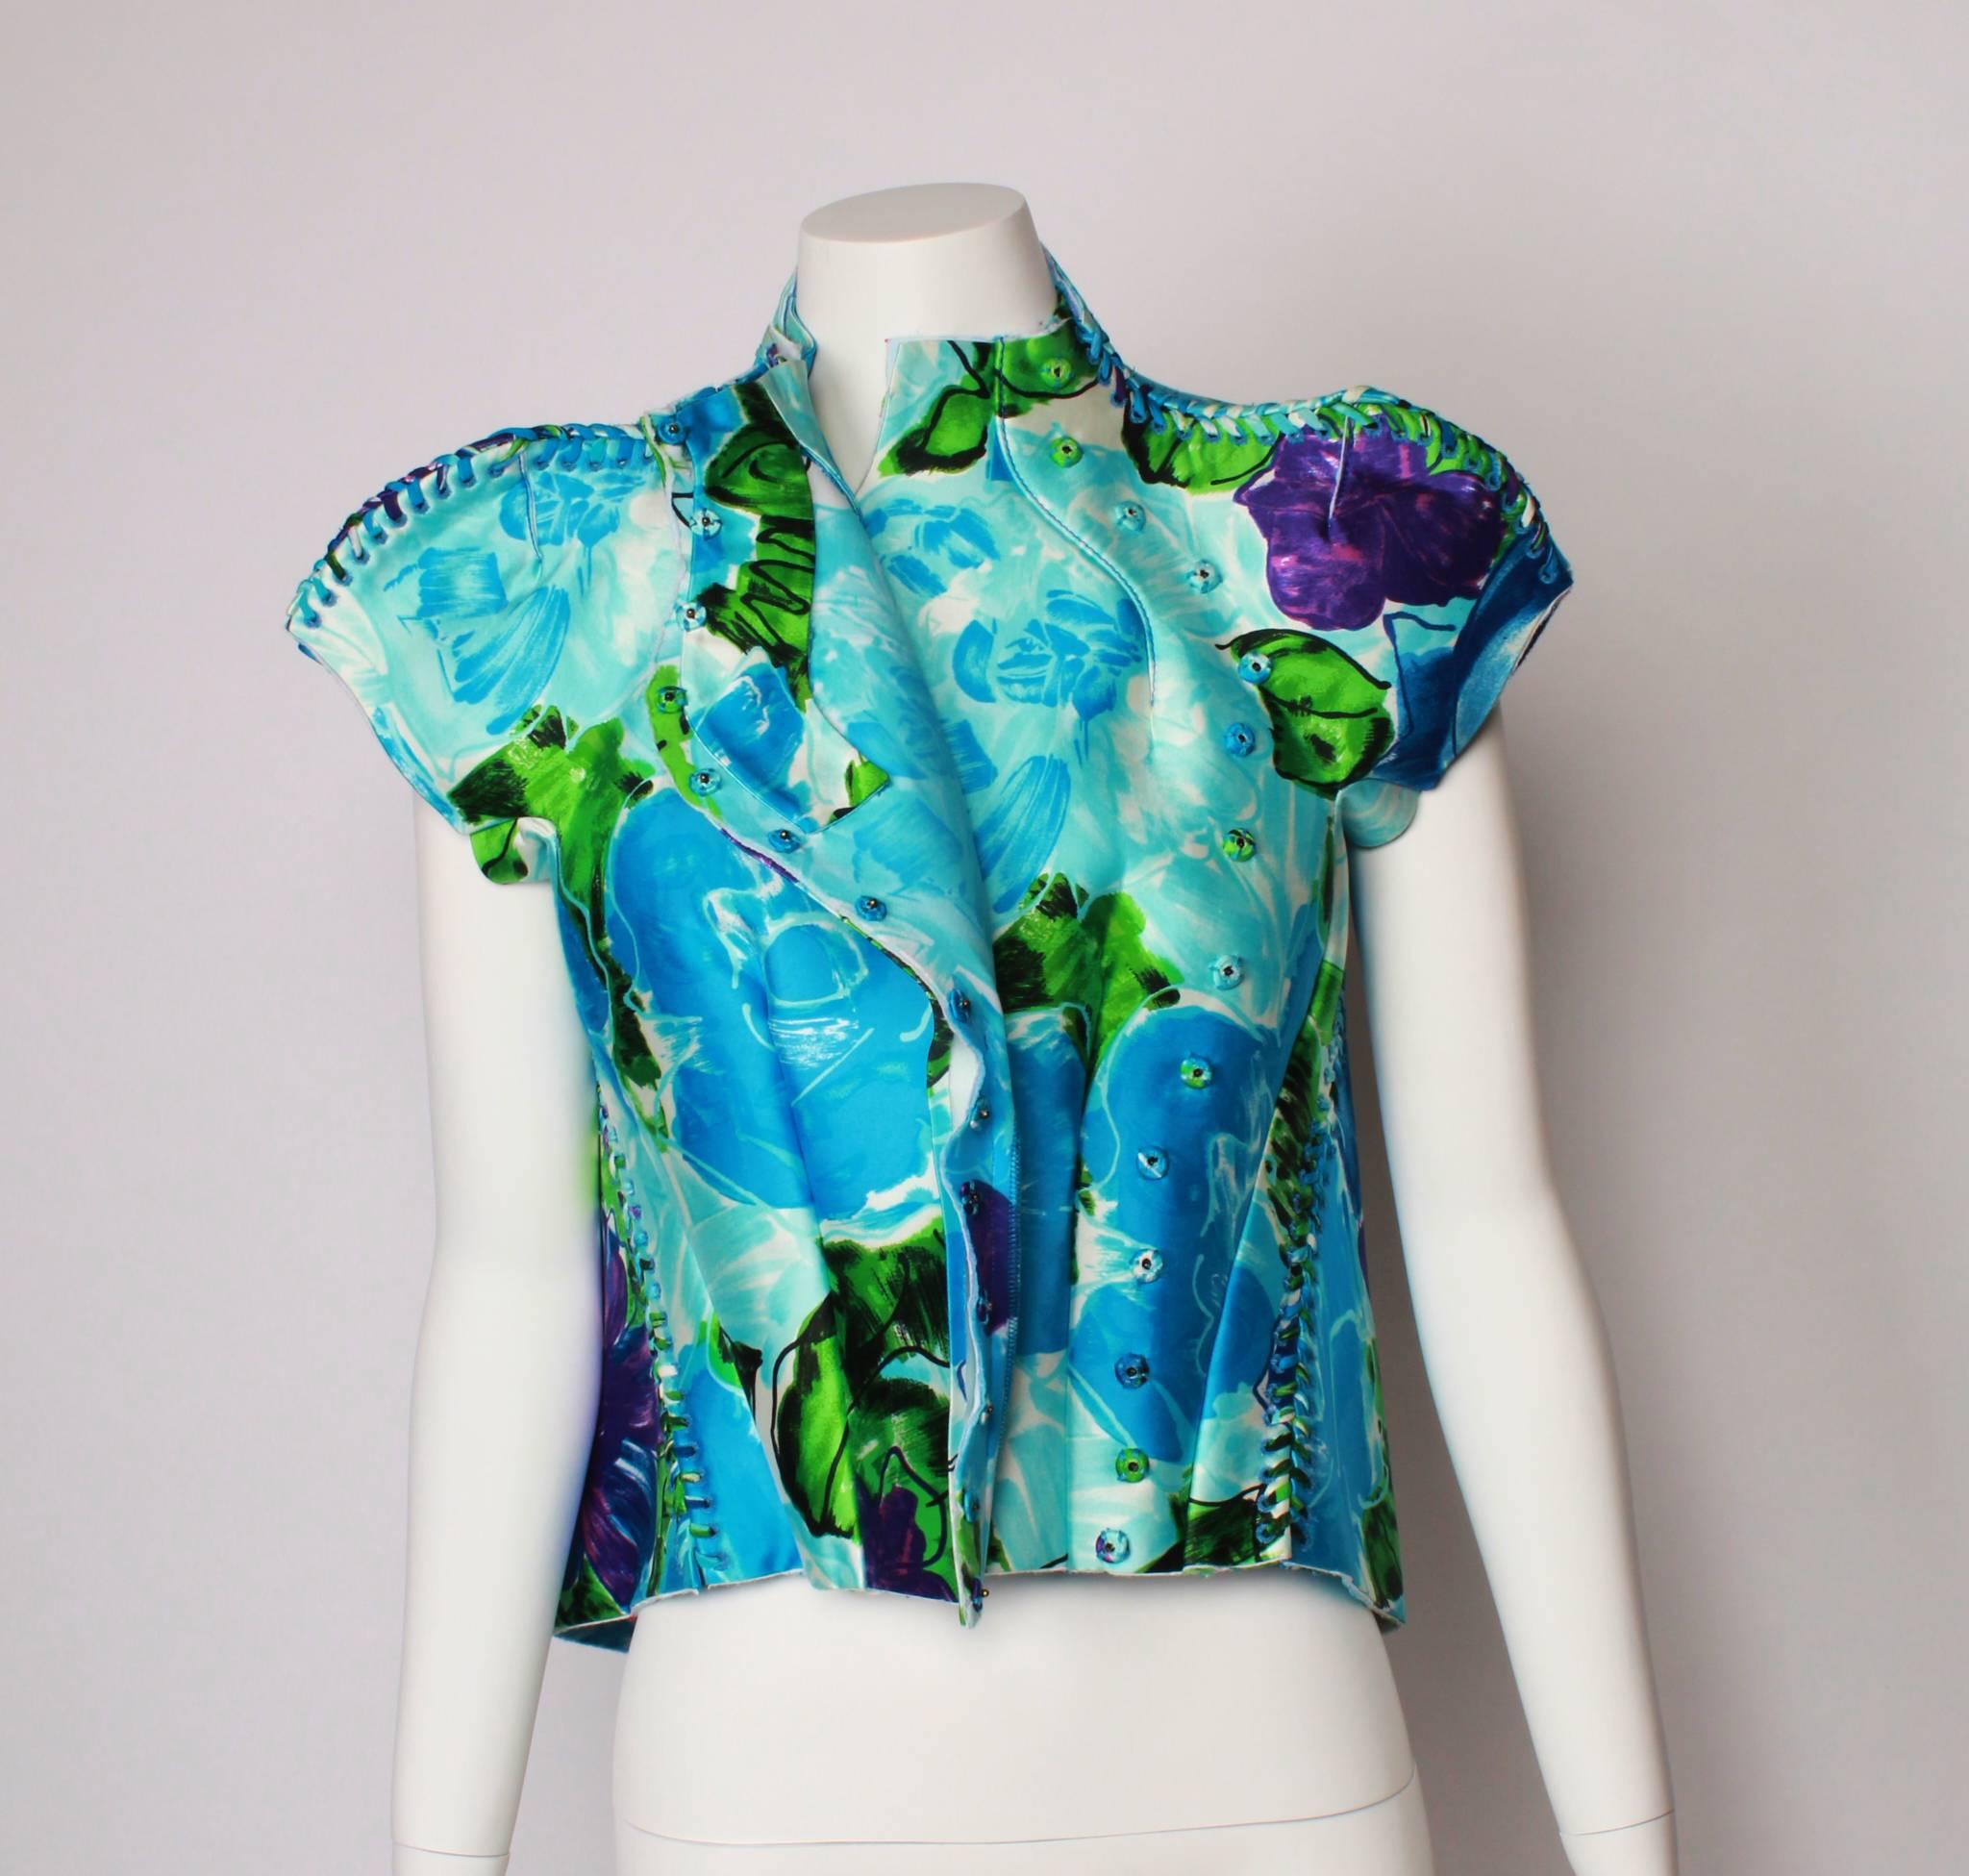 Blue & green silk hand-painted over neoprene based on the archives of Cristobal Balenciaga by Nicholas Ghesquiere

